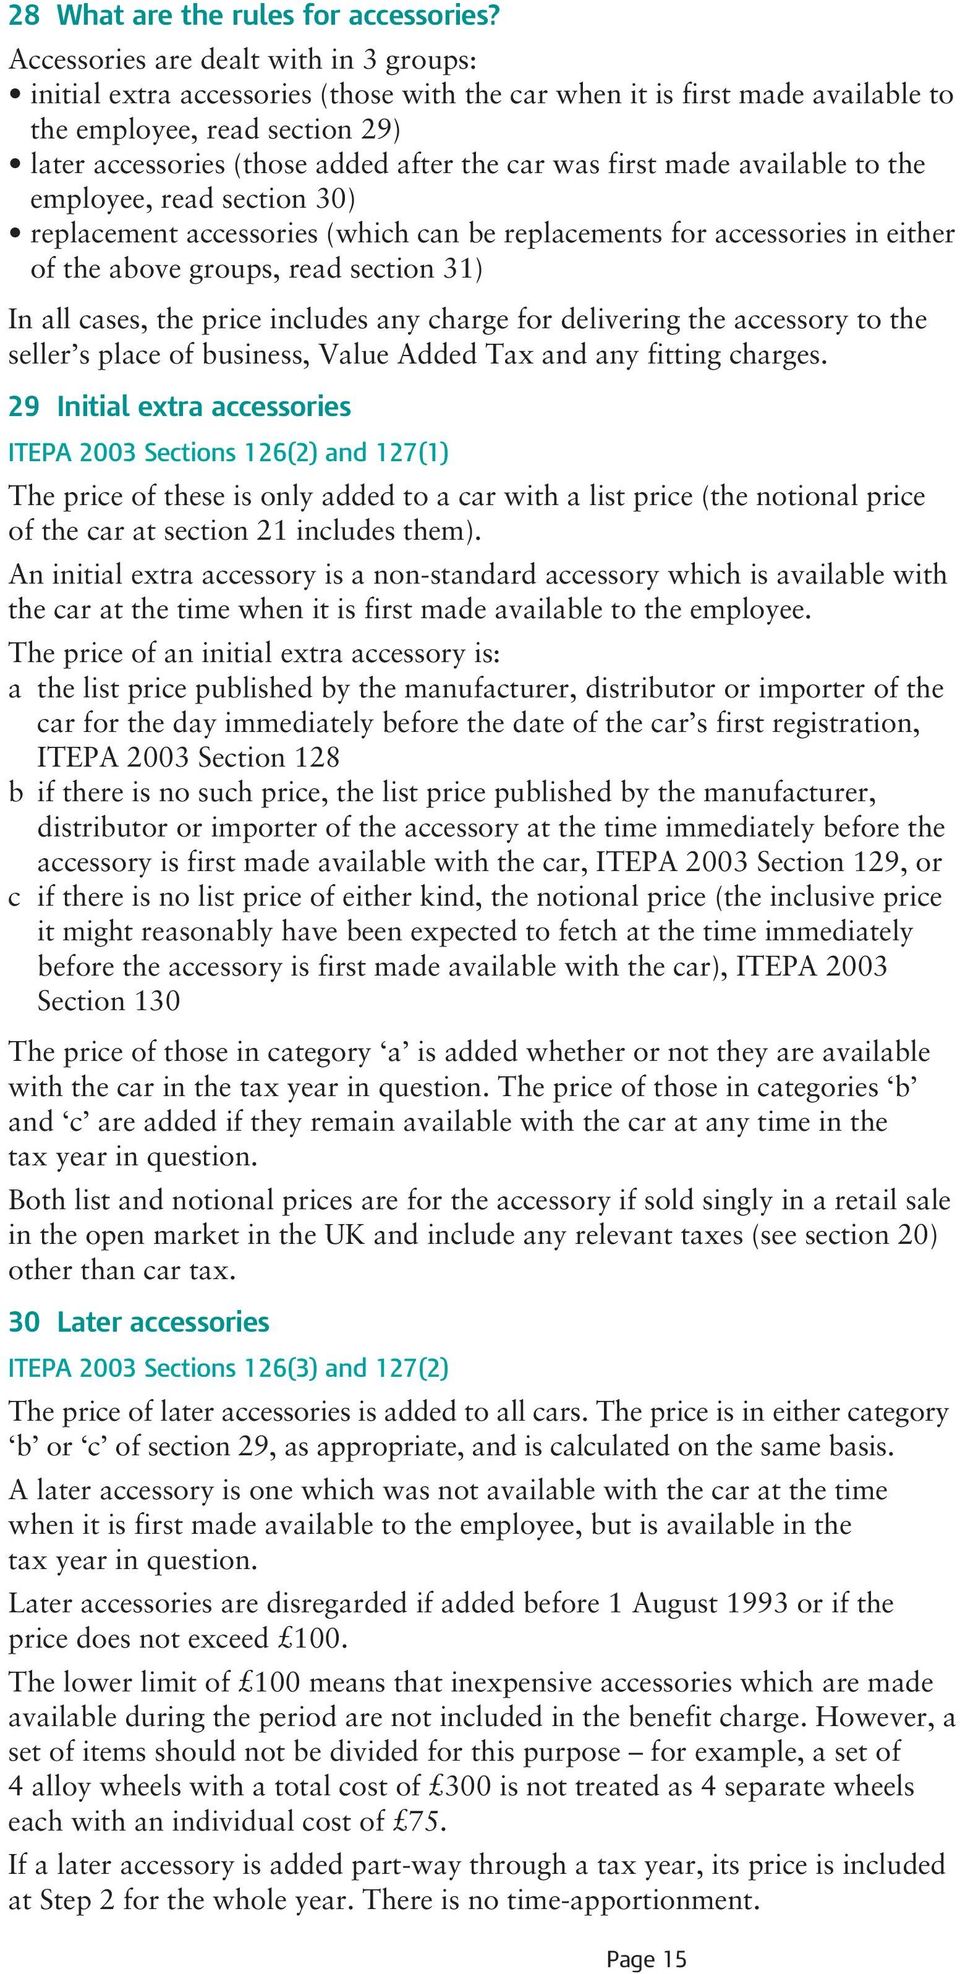 was first made available to the employee, read section 30) replacement accessories (which can be replacements for accessories in either of the above groups, read section 31) In all cases, the price